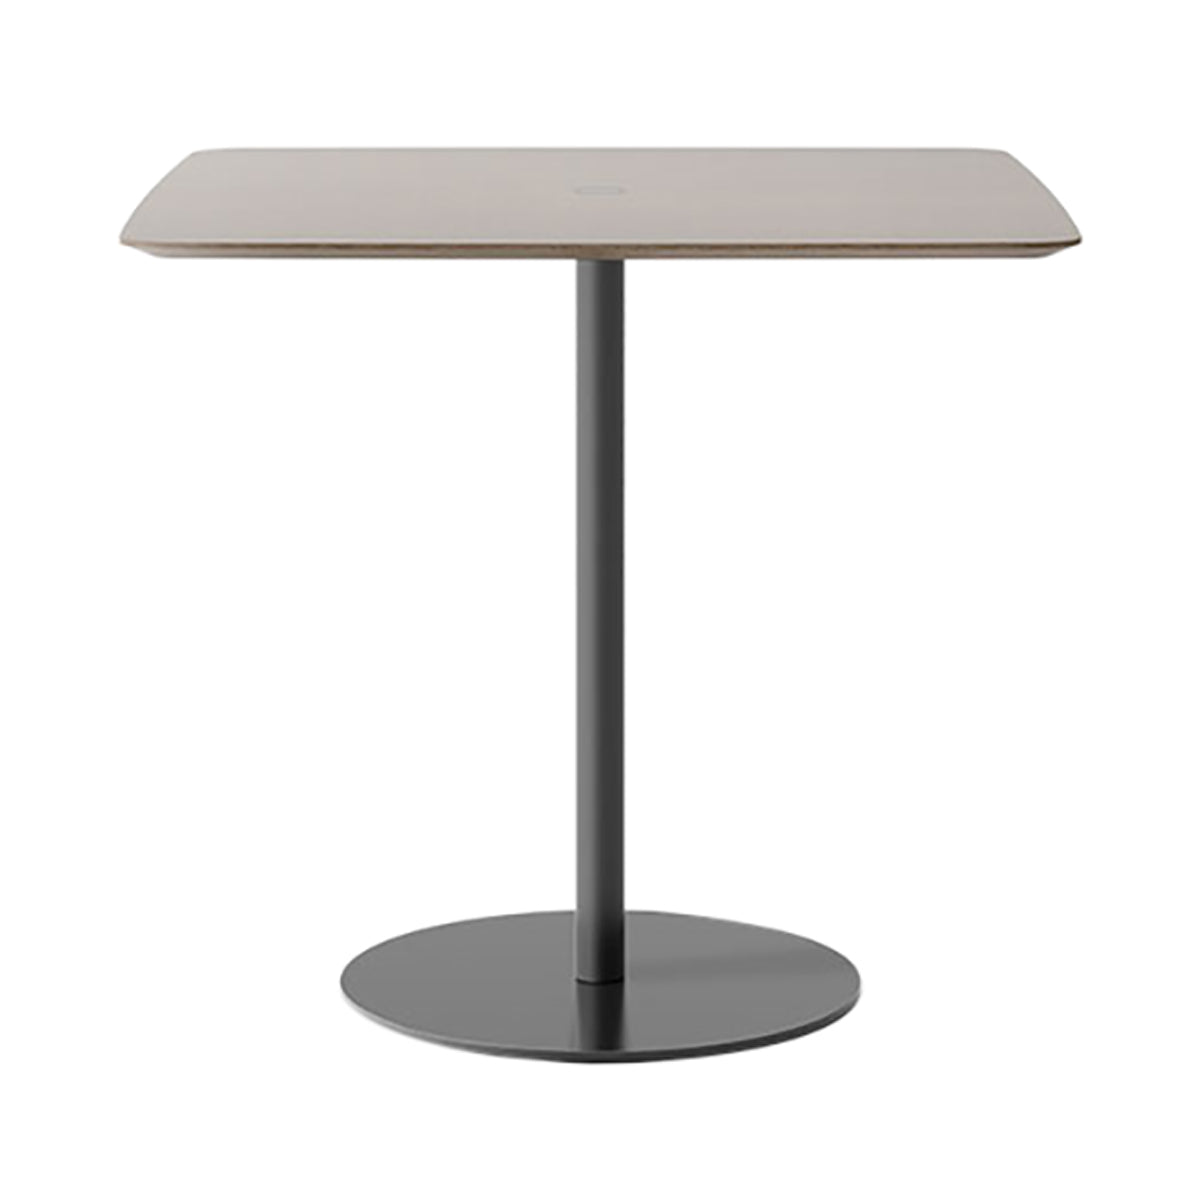 Nucleo Dining Table: Square + Black + Dark Grey Stained Oak